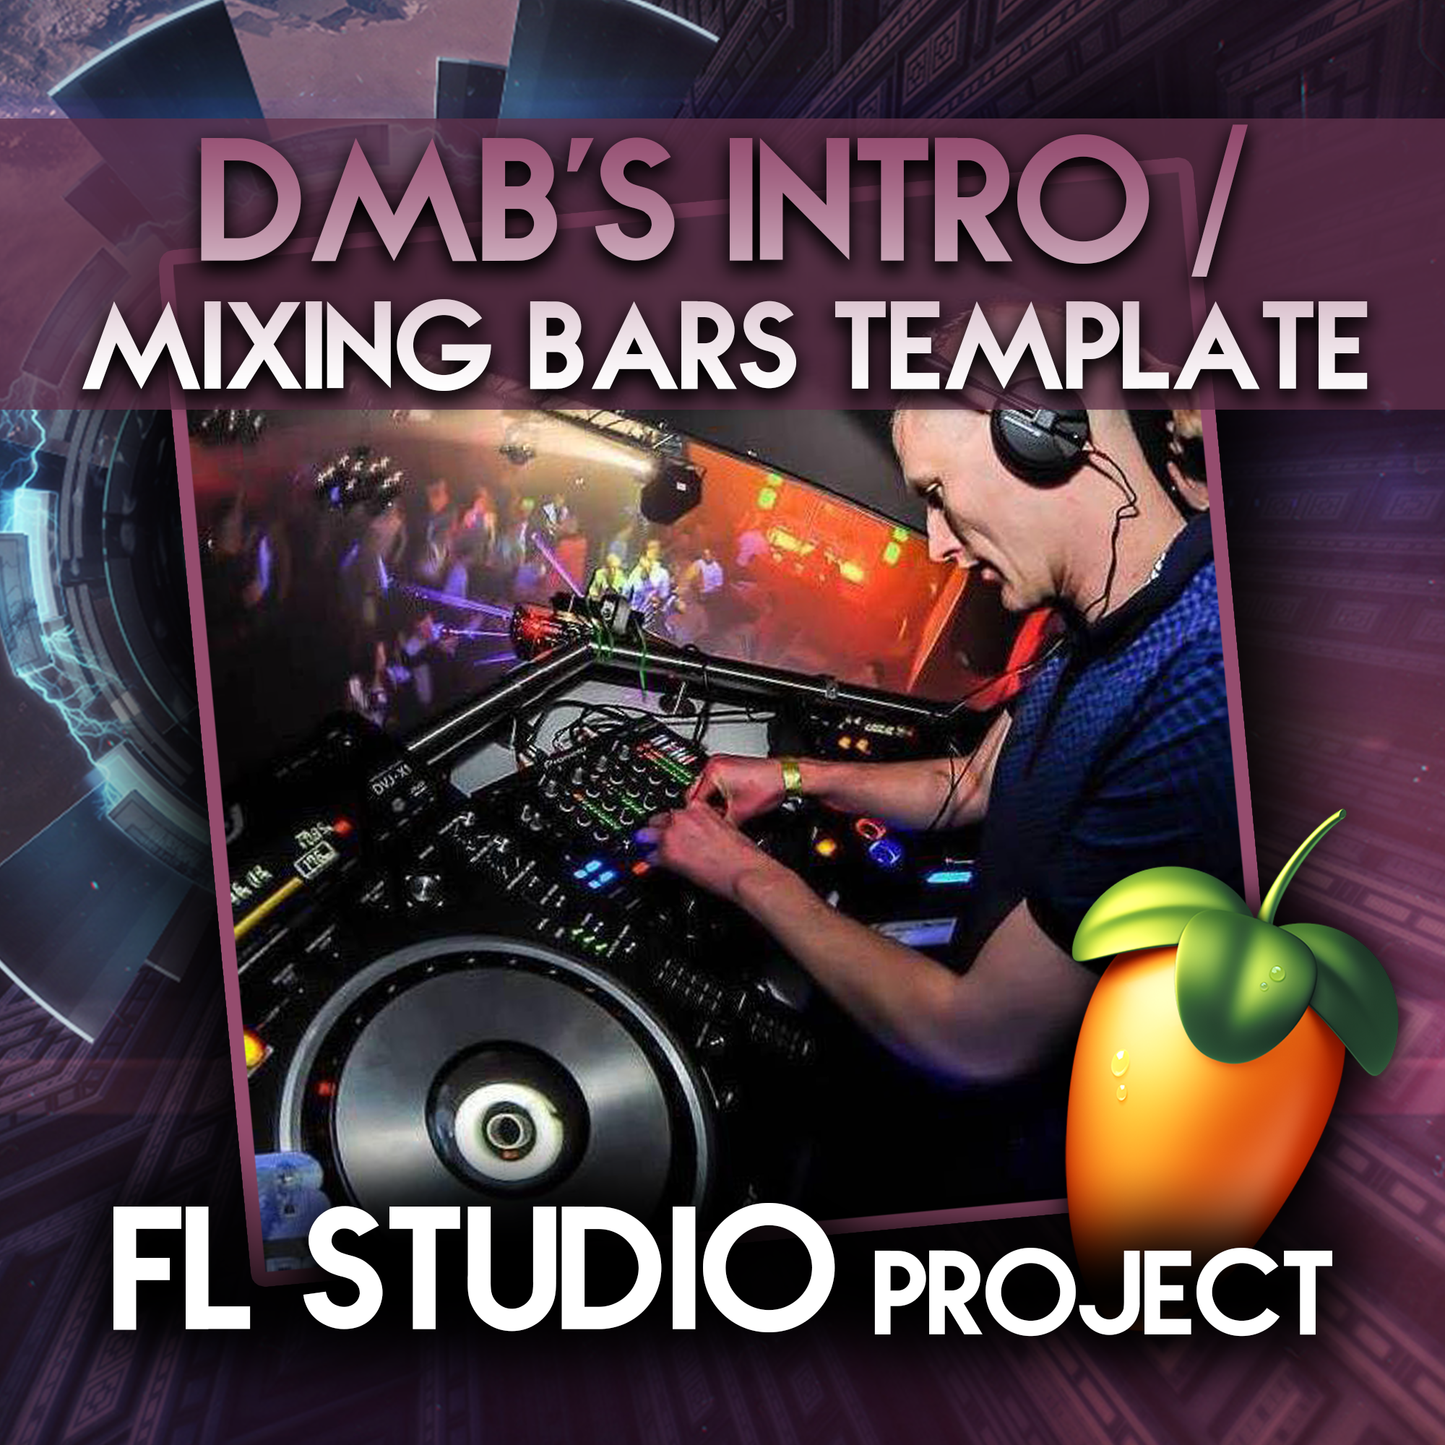 DMB's Intro / Mixing Bars Template (FL Studio Project) - Rewired Records